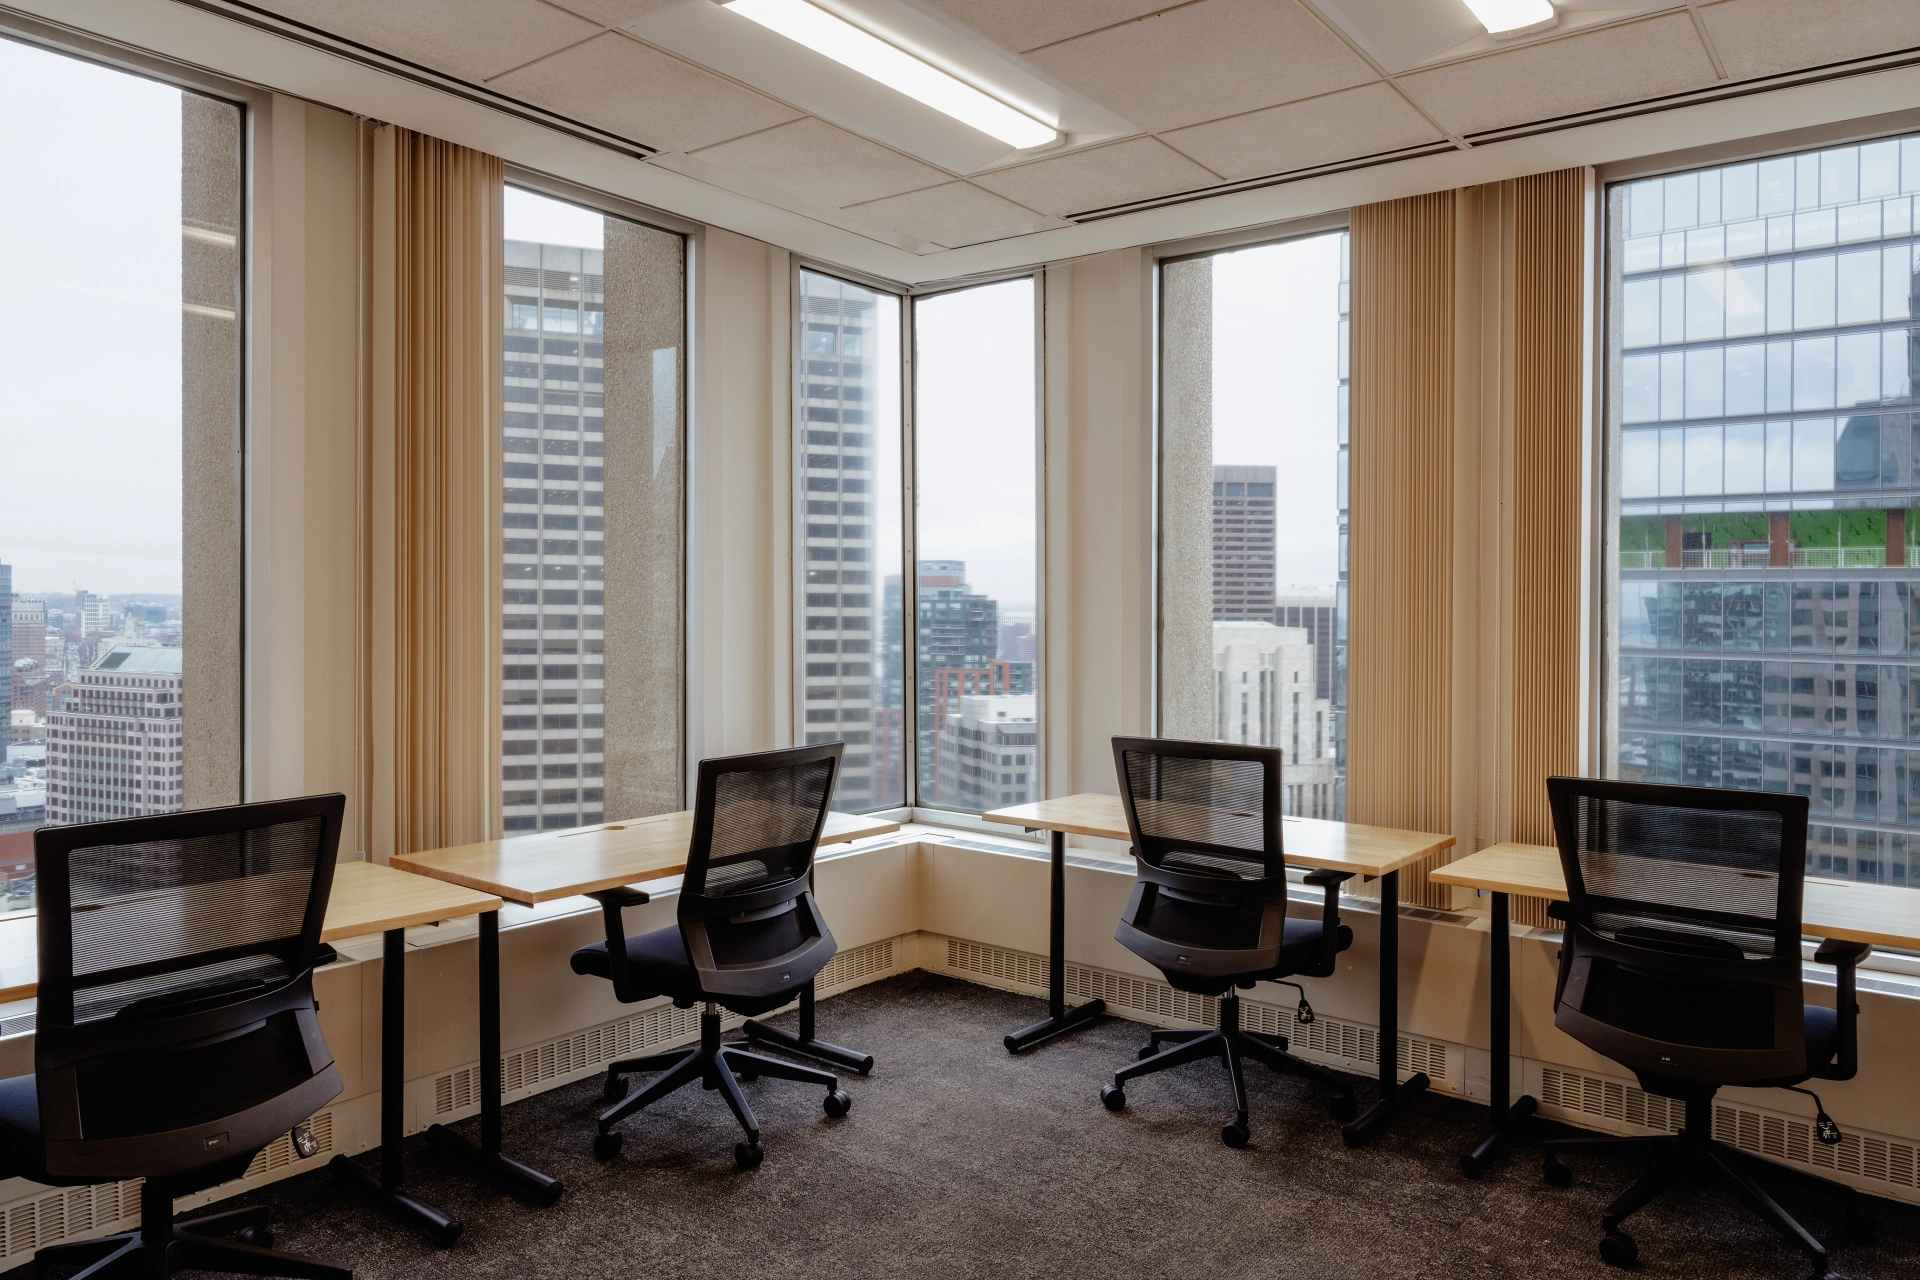 A Boston office meeting room with desks and chairs and a view of the city.